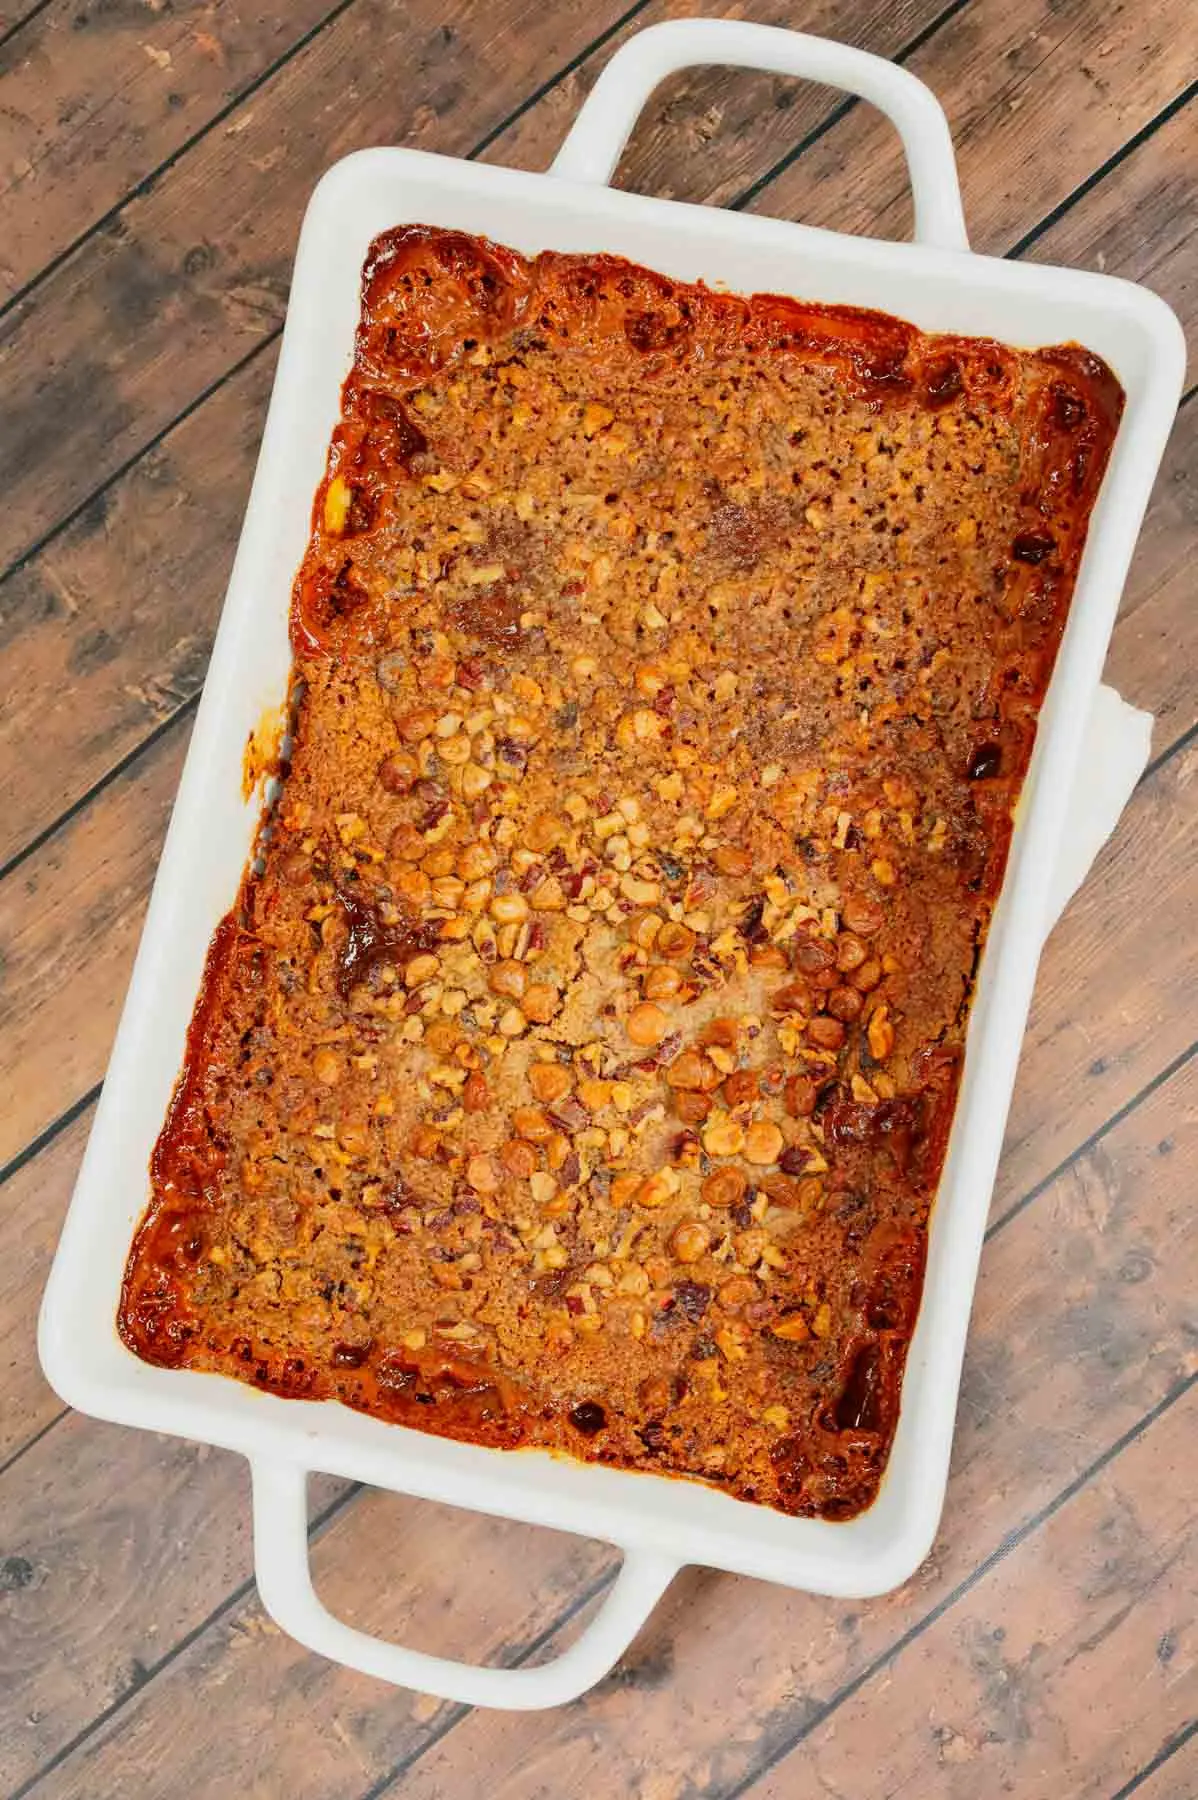 Carrot Dump Cake is an easy and decadent dessert recipe using freshly grated carrot, canned dulce de leche, store bought cream cheese frosting, boxed carrot cake mix, cream cheese flavoured baking chips, chopped pecans and melted butter.